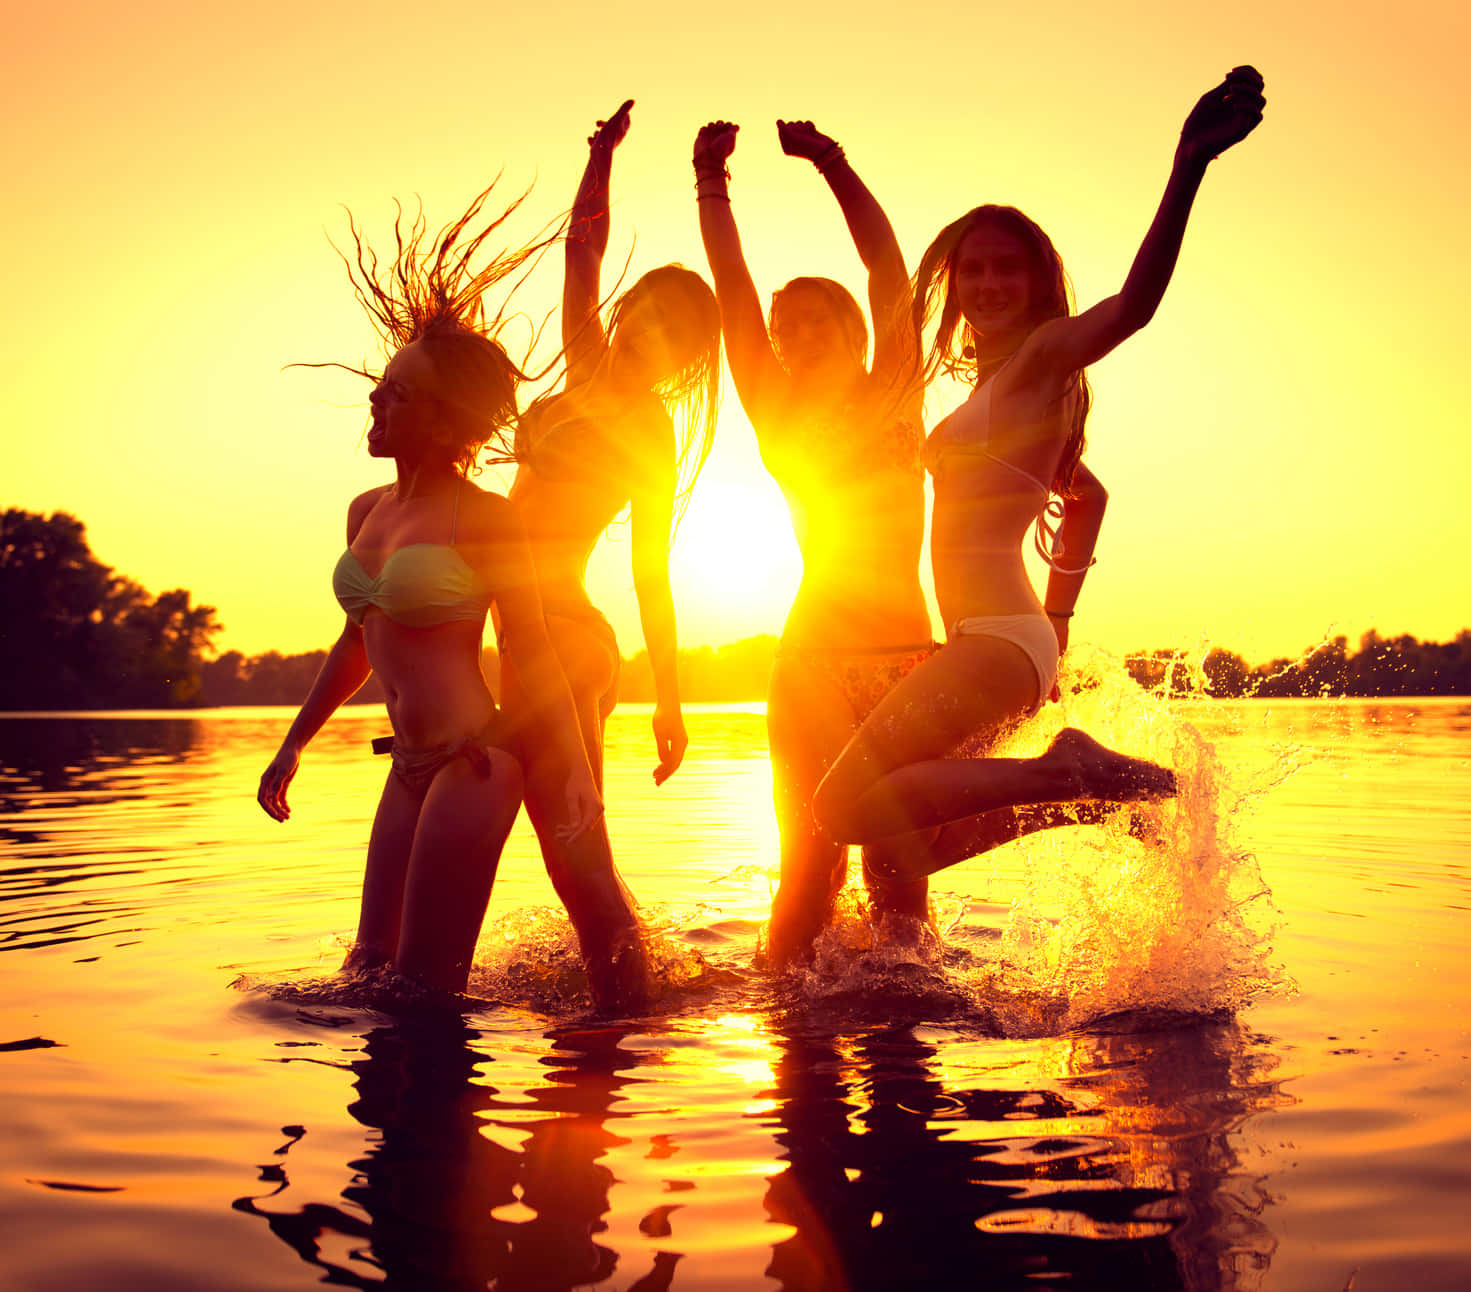 Exciting Beach Dance Party under the Sun Wallpaper